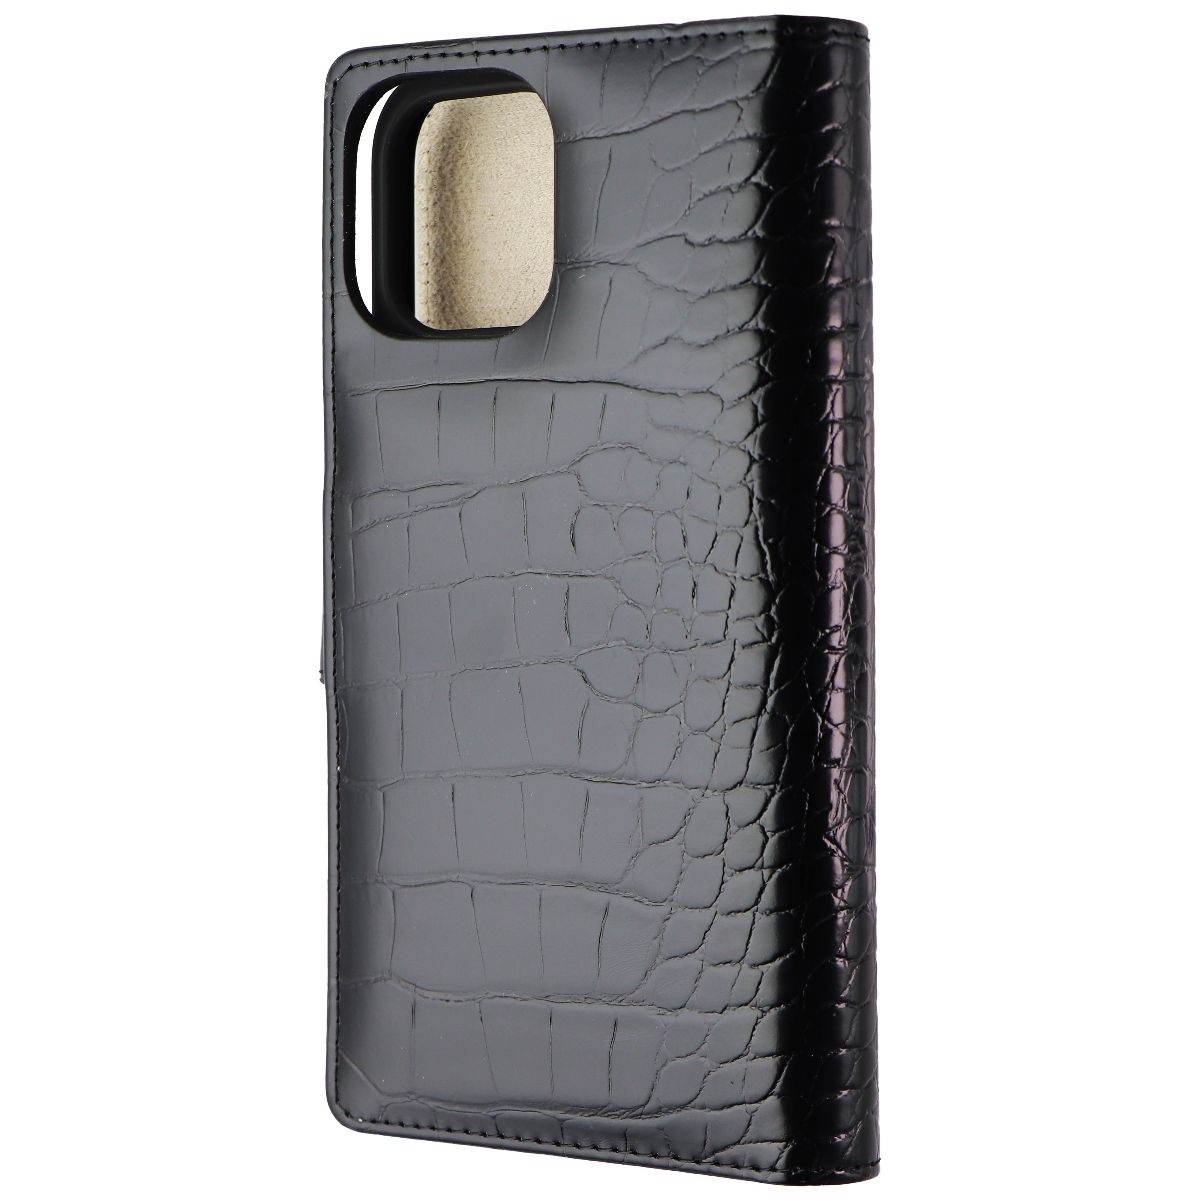 IDeal Of Sweden Cora Phone Wallet For IPhone 12 Pro Max - Jet Black Croco